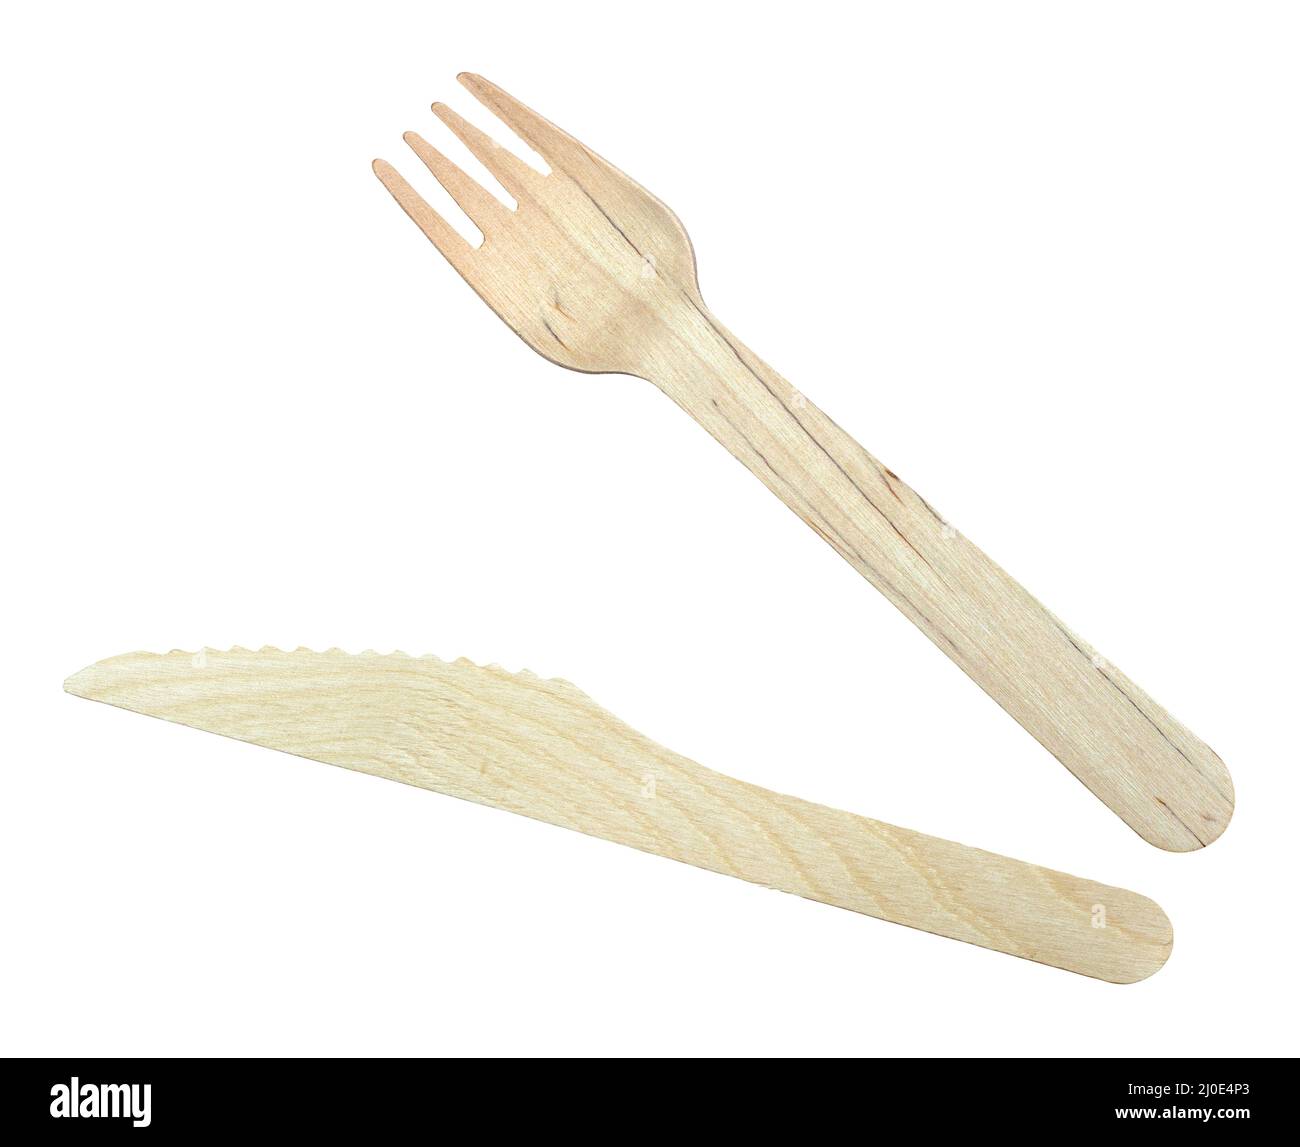 Isolated Wooden Knife And Fork Stock Photo